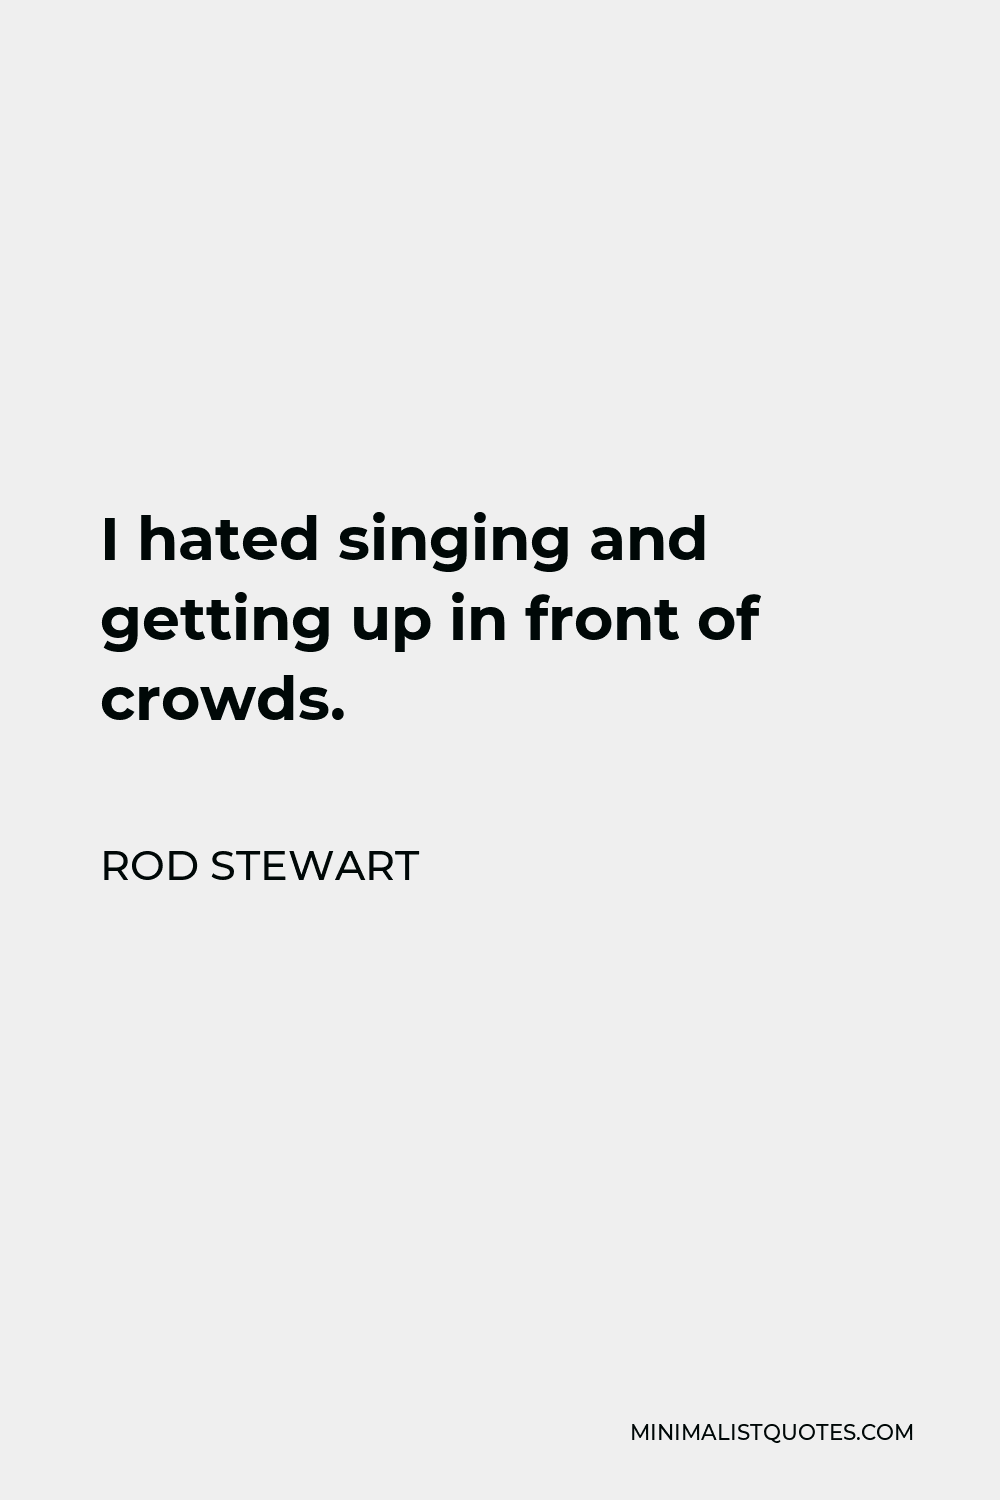 Rod Stewart Quote - I hated singing and getting up in front of crowds.